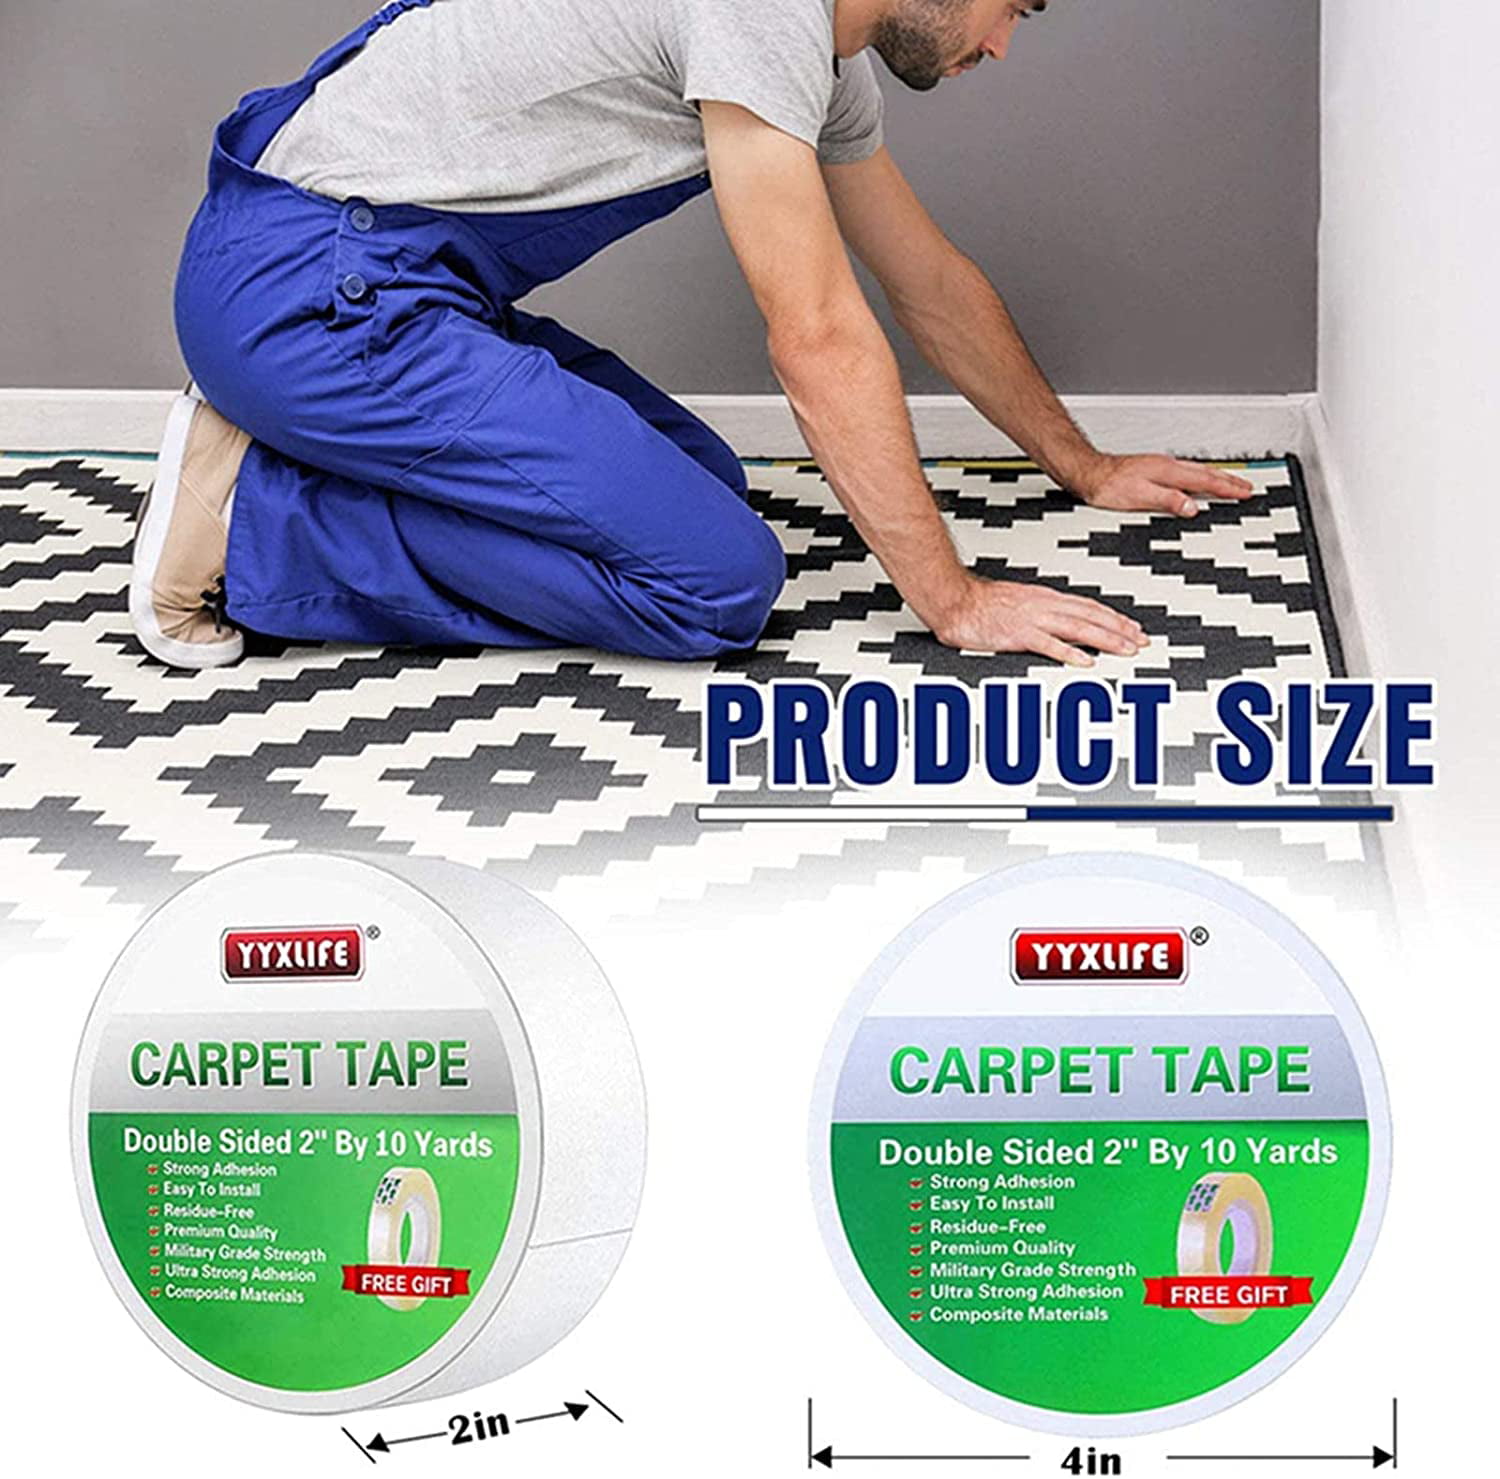 YYXLIFE Double Sided Carpet Tape for Area Rugs Carpet Adhesive Rug Gripper 30YD 